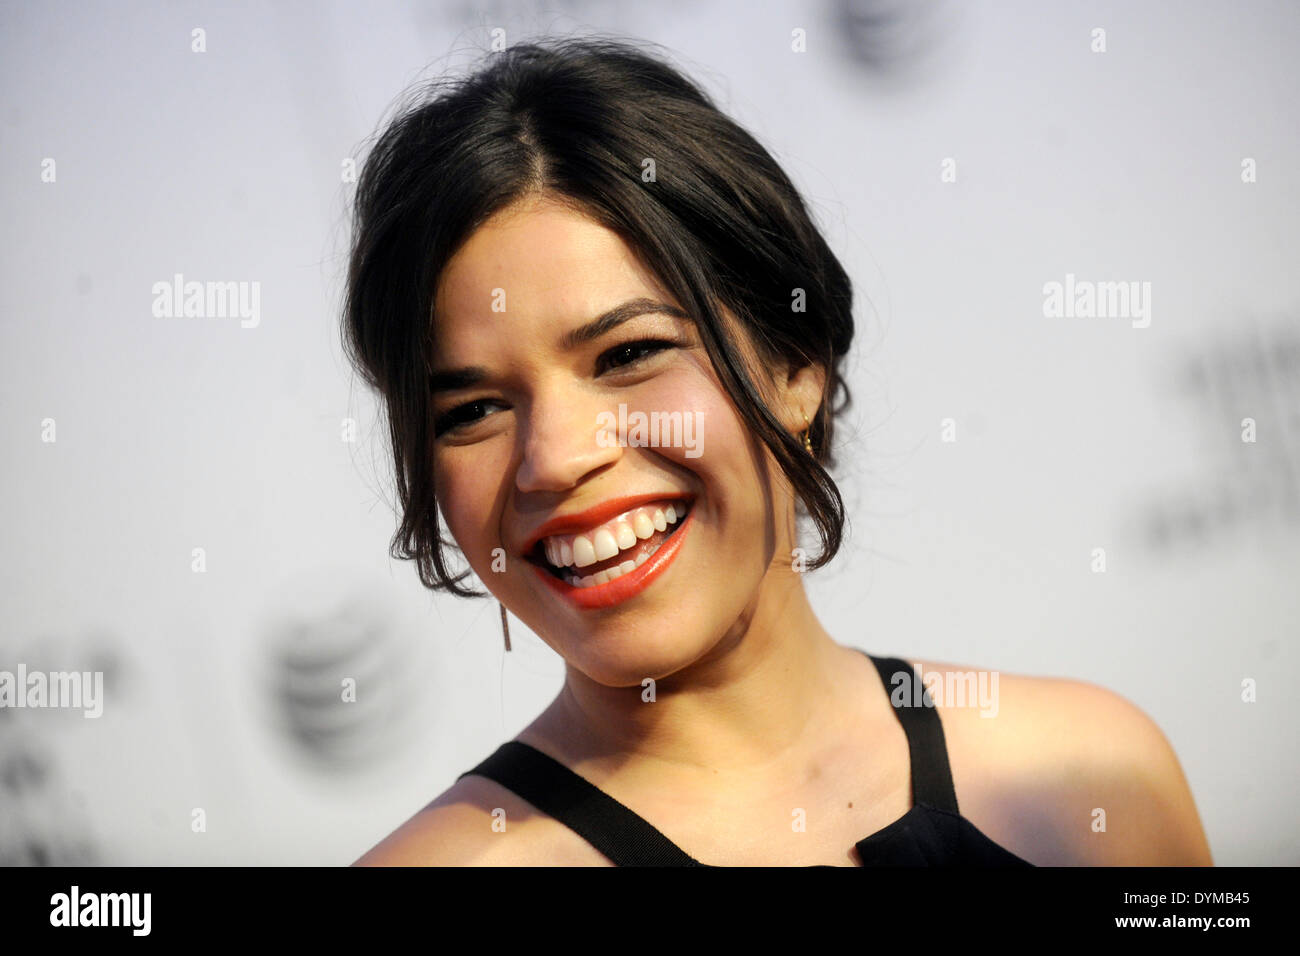 America Ferrera Attends The Screening Of X Y During The 14 Tribeca Film Festival At Bmcc Tribeca Pac On April 19 14 In New York City Picture Alliance Stock Photo Alamy